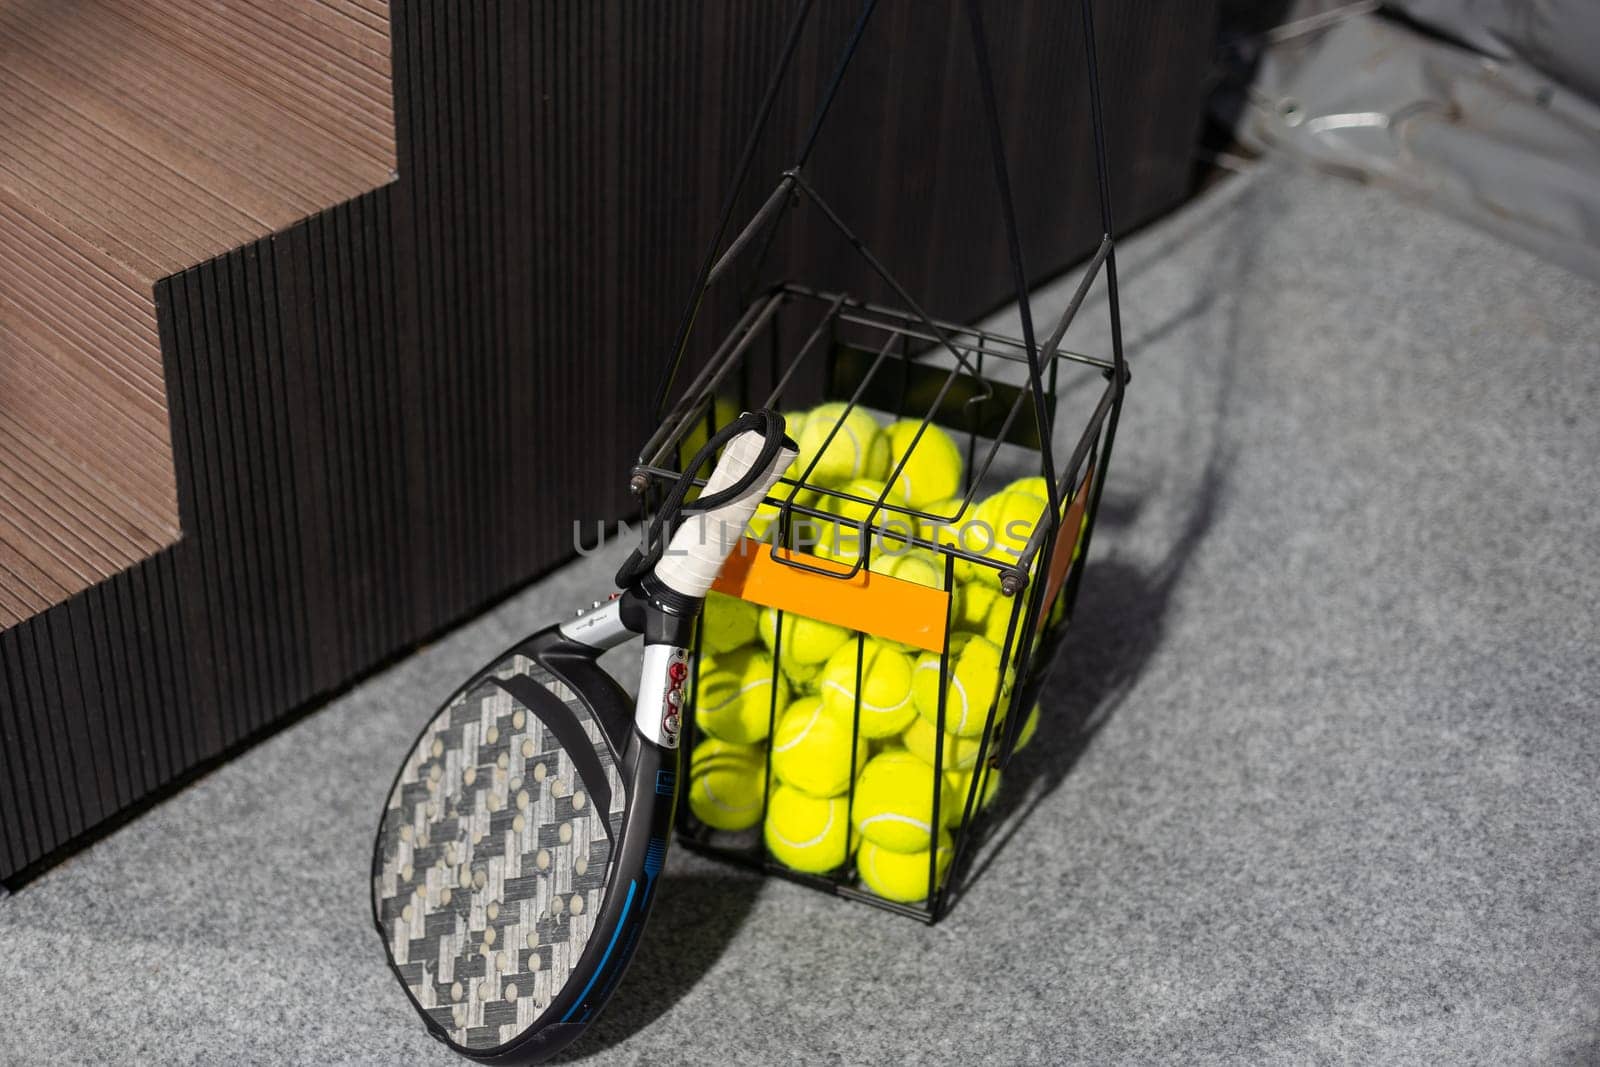 paddle tennis objects in court, racket and balls by Andelov13